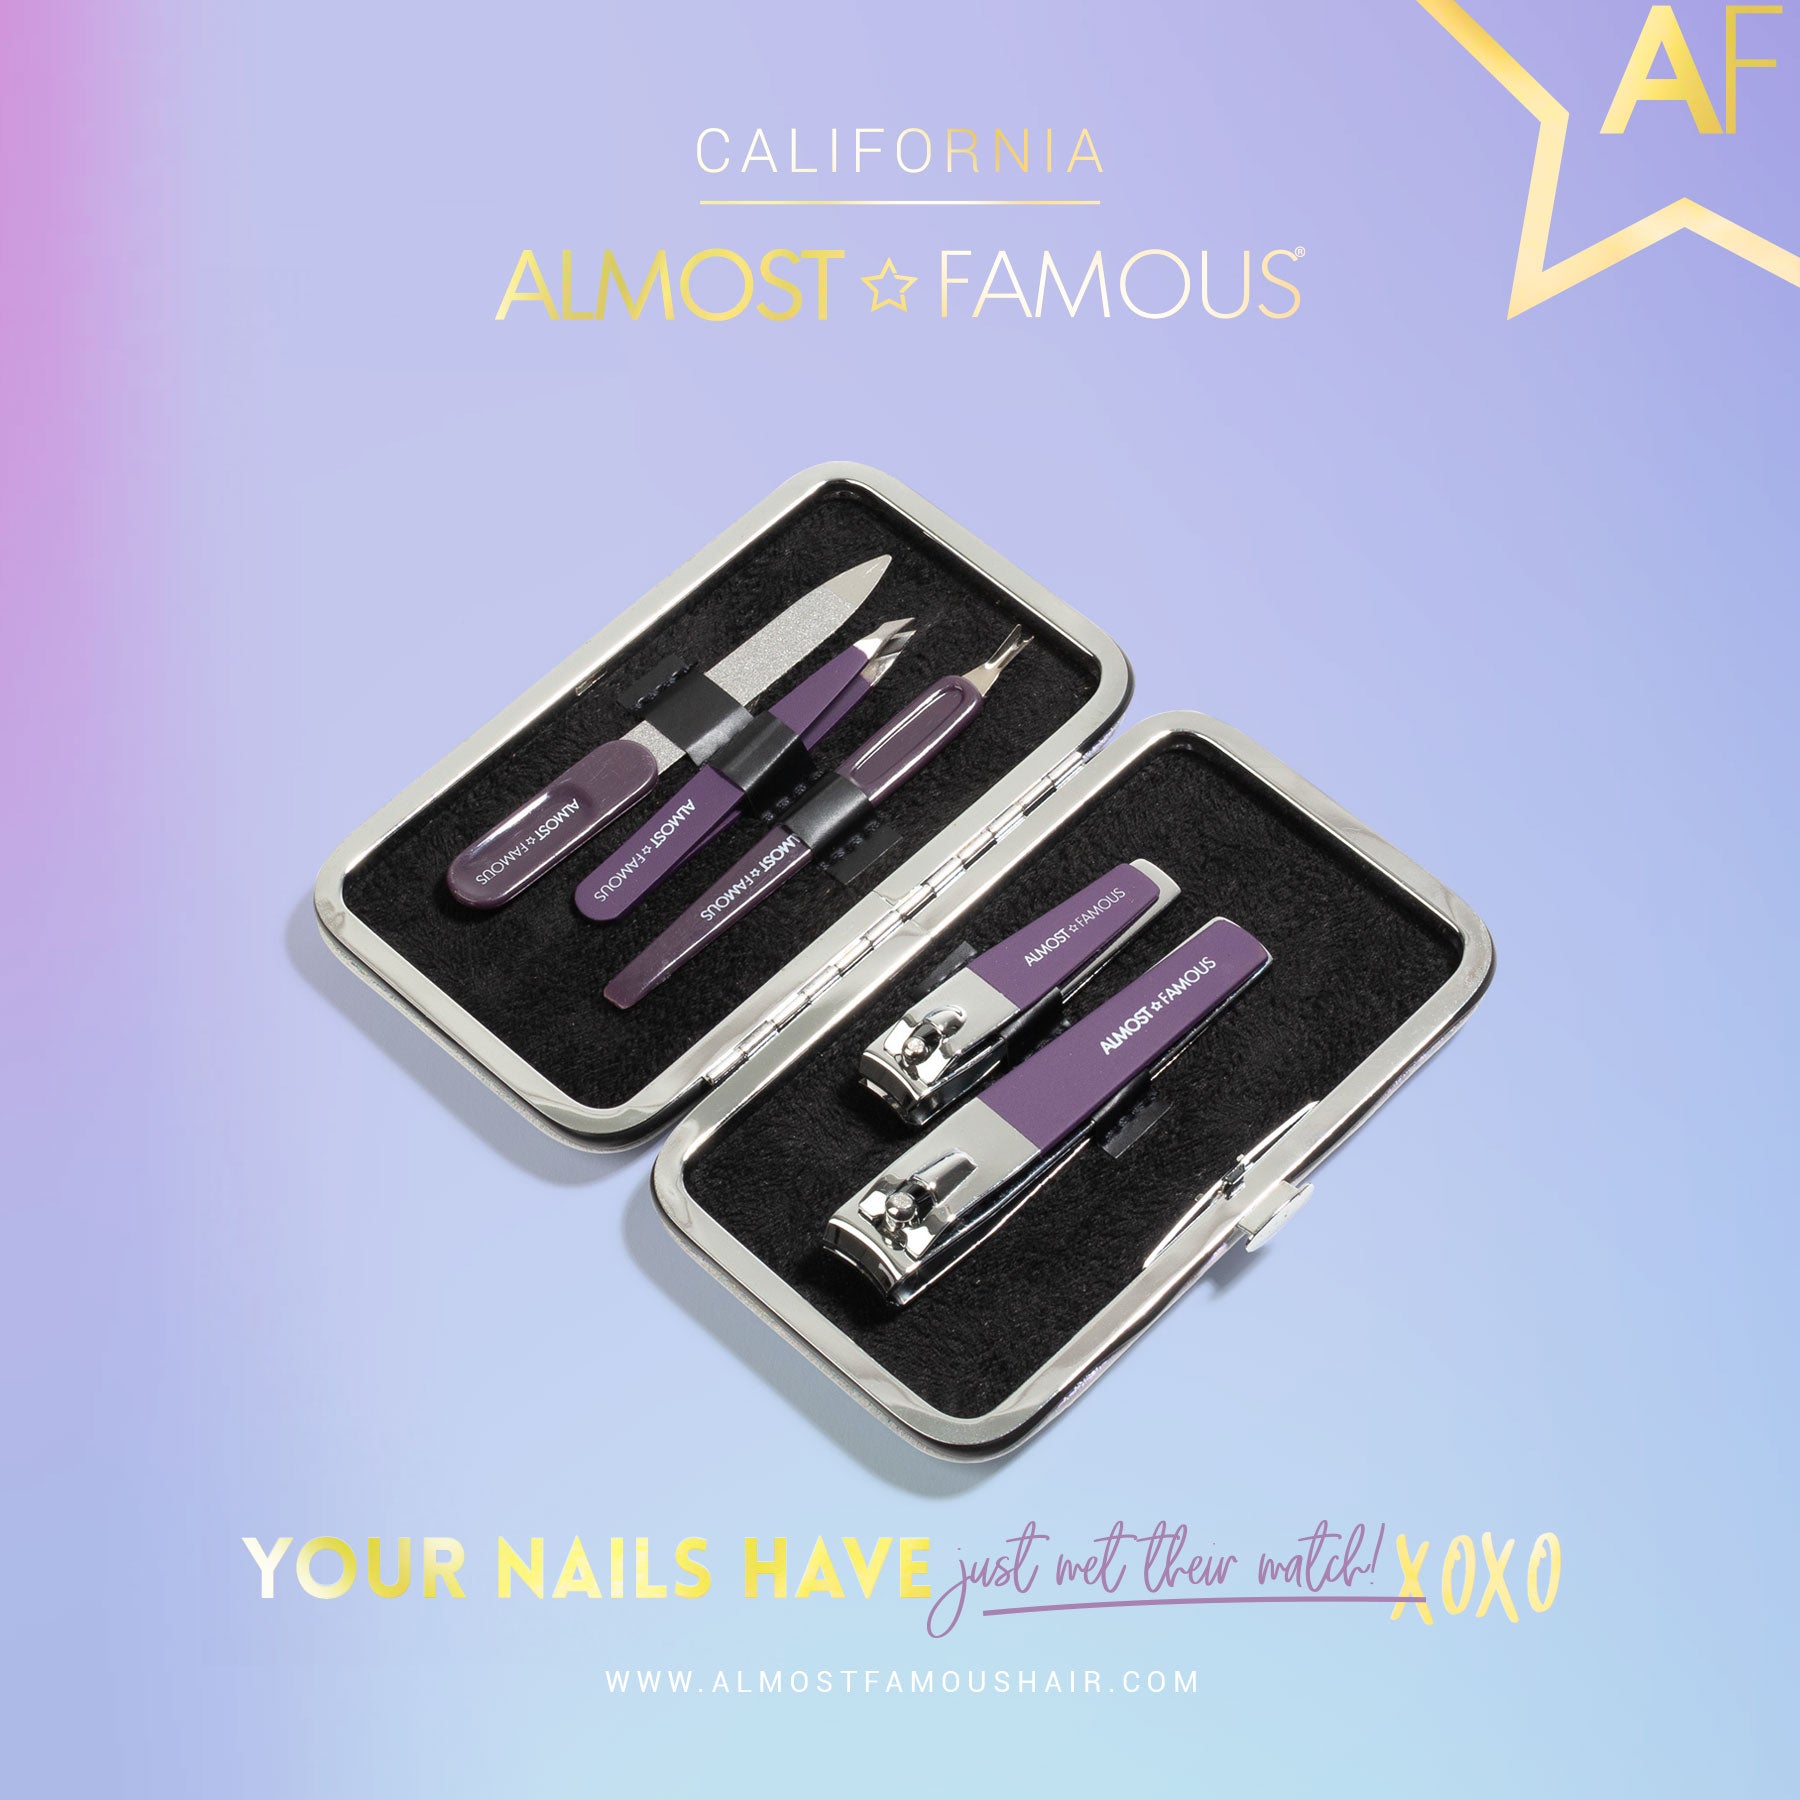 Nail Manicure Kit With Travel Case